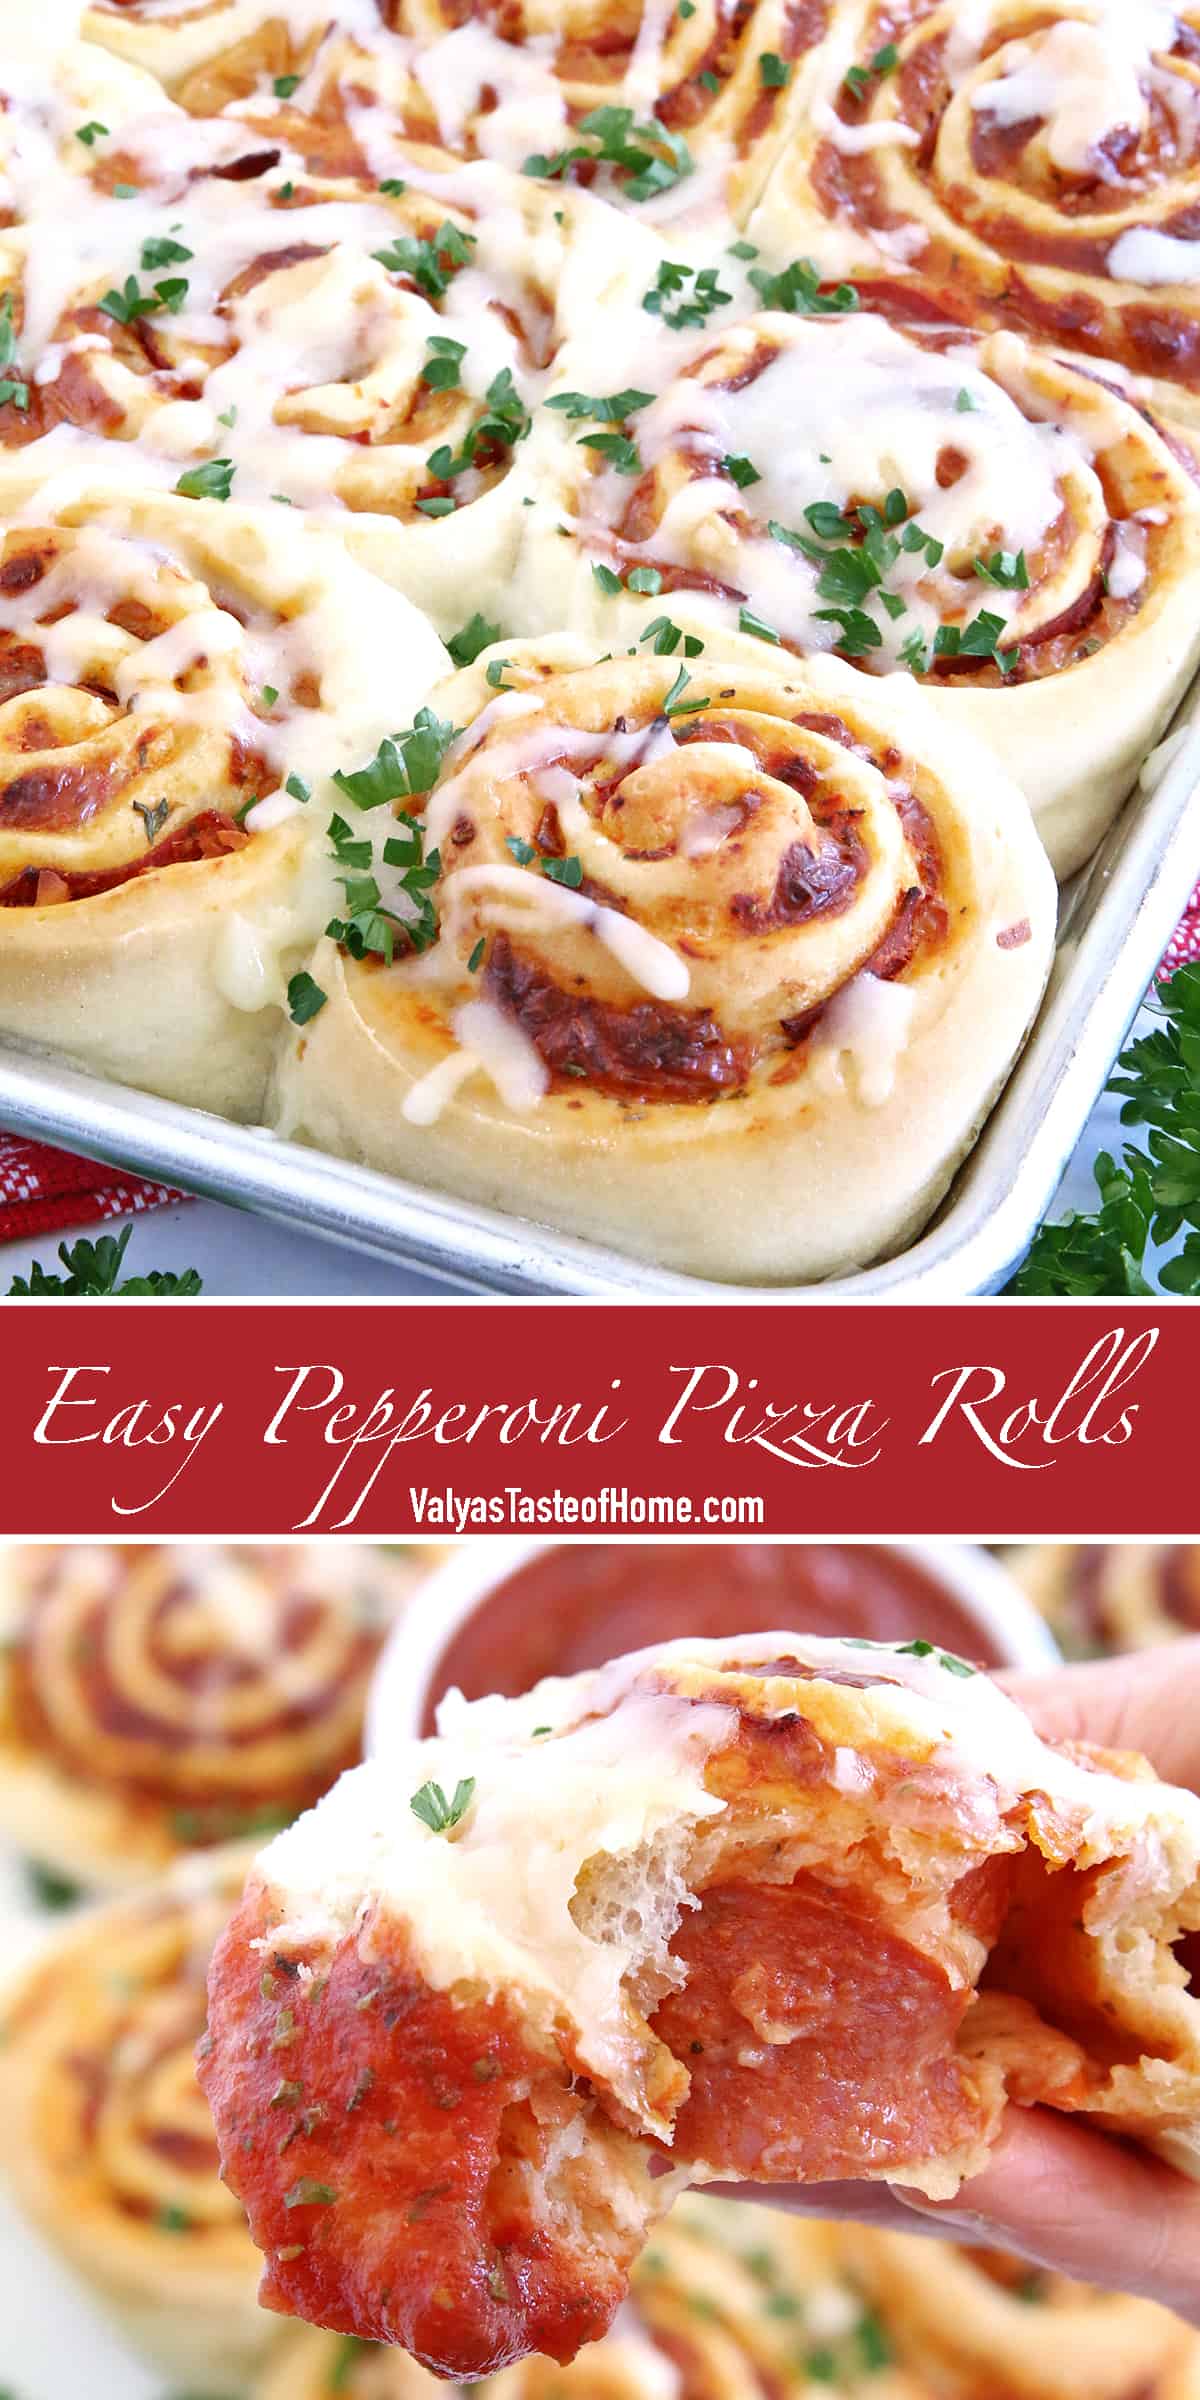 Move over, tiny pizza bites, because here come hearty Easy Pepperoni Pizza Rolls! This recipe is made with my popular super soft and chewy Homemade Pizza Dough, Homemade Pizza Sauce, loads of scrumptious turkey pepperoni, and mozzarella cheese. All rolled up into one amazingly tasty treat that is always a big hit at my house.